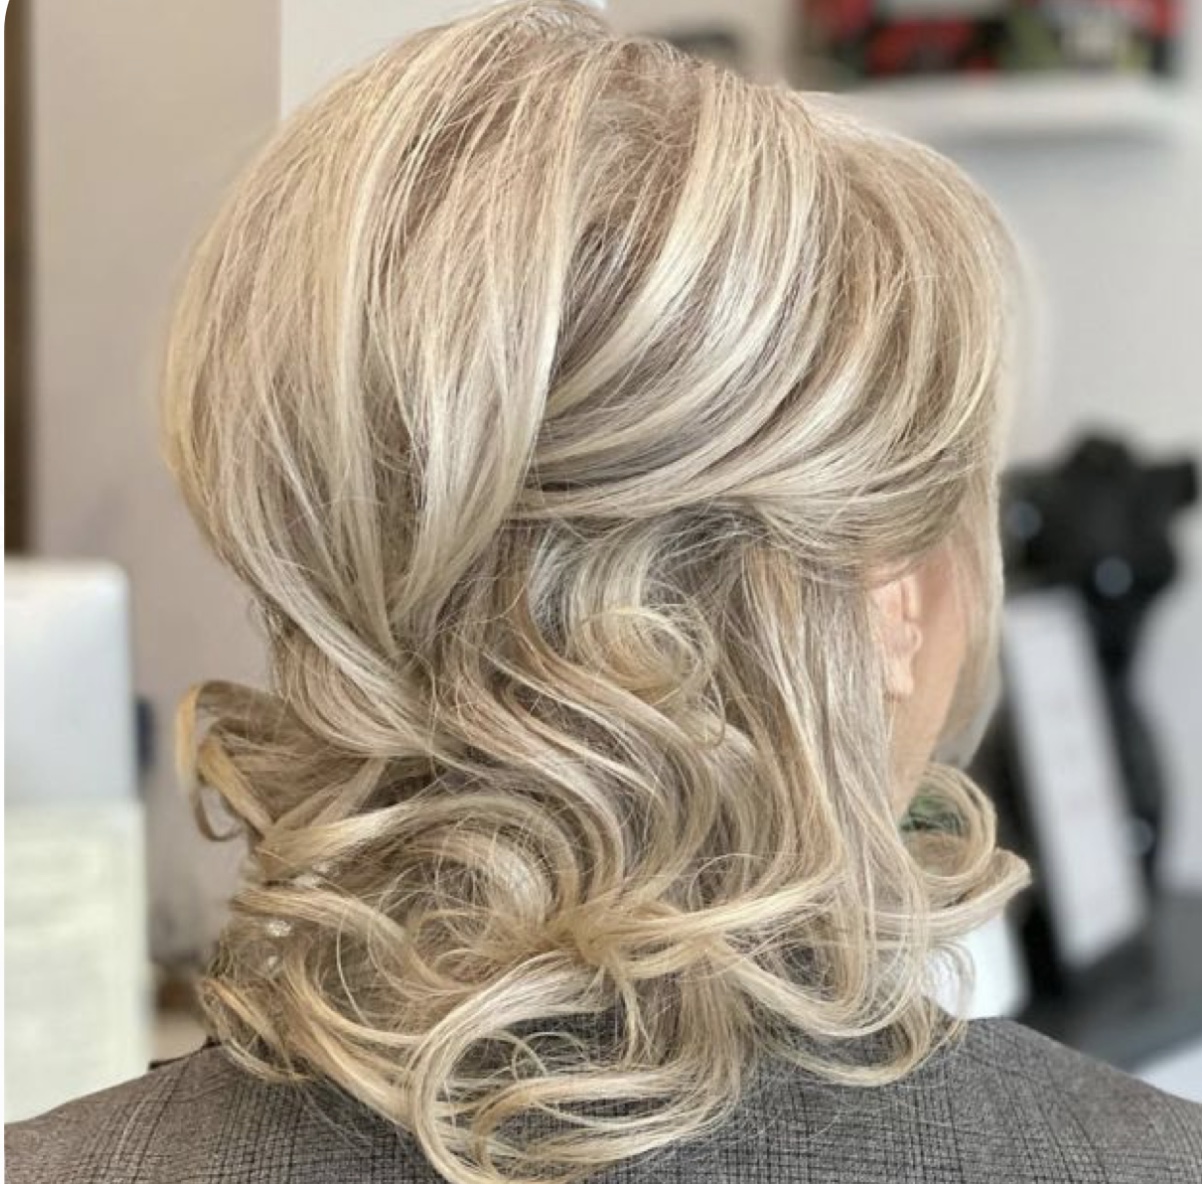 What Is The Best Hairstyle For Wedding